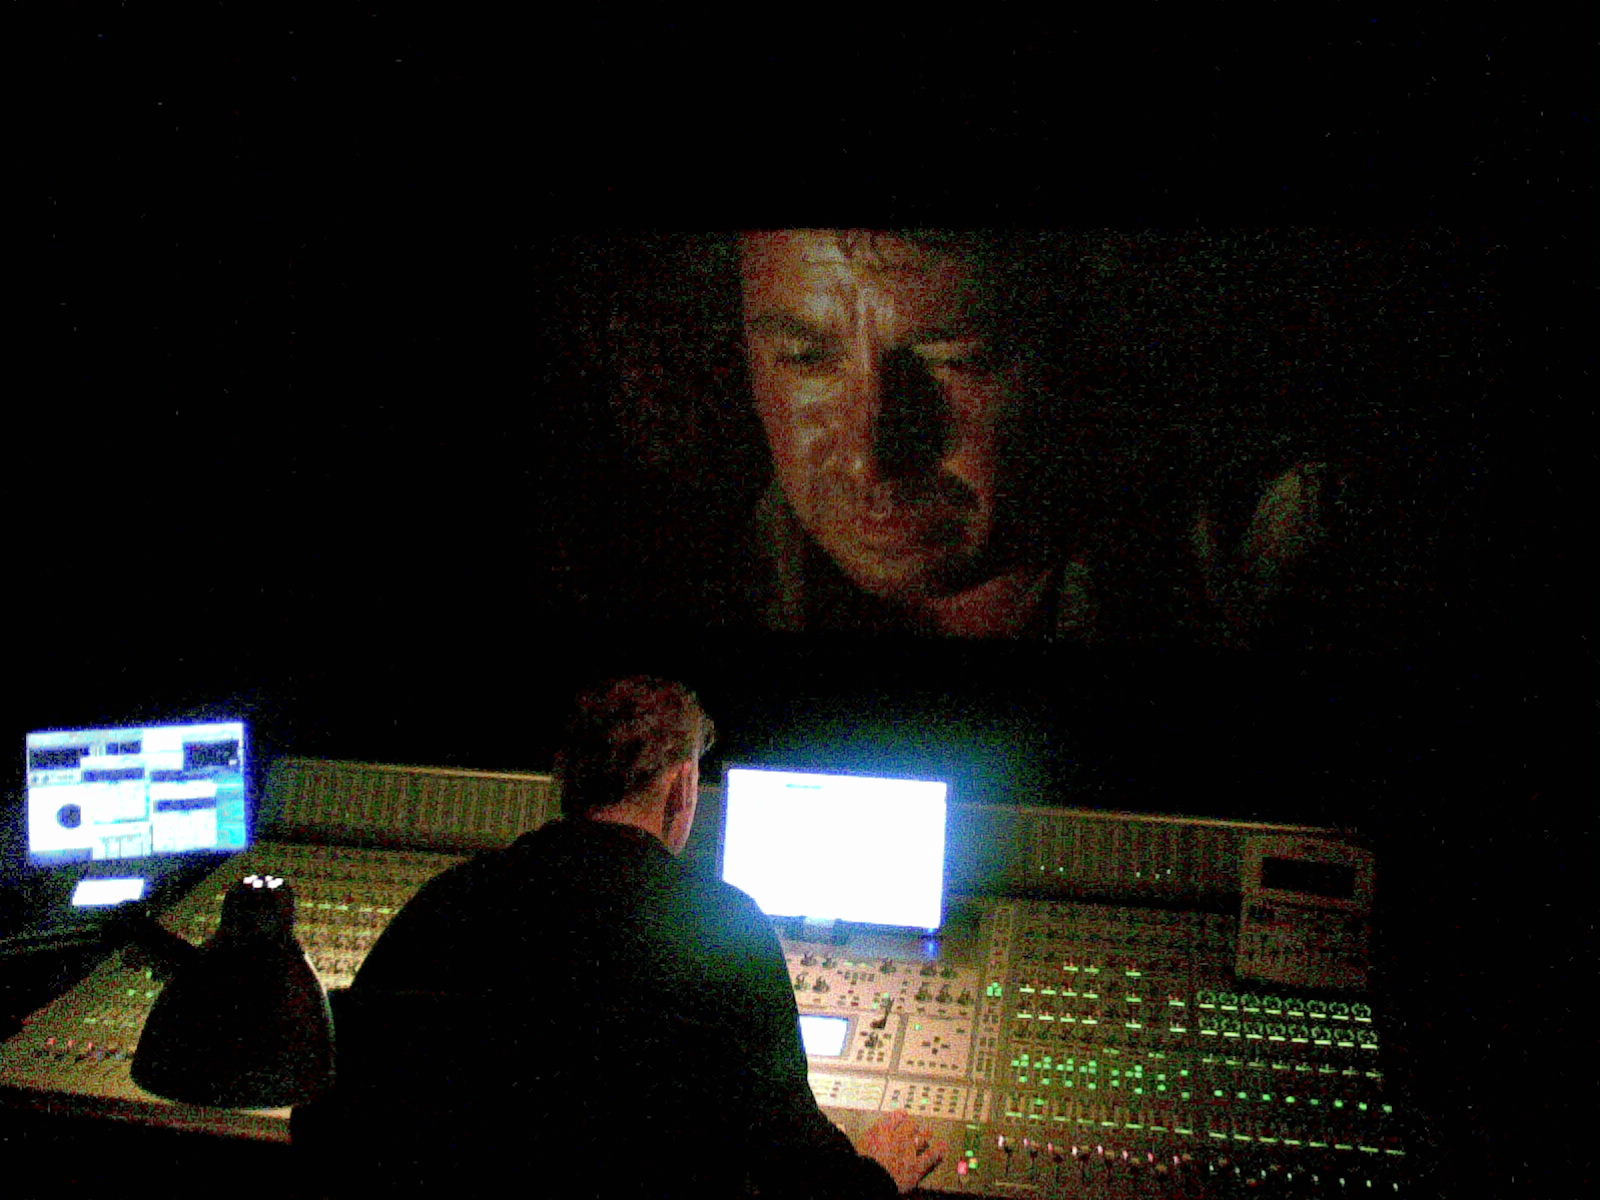 busy mixing 'Silent Army' on screen Marco Borsato, at the mixing desk Peter Warnier.